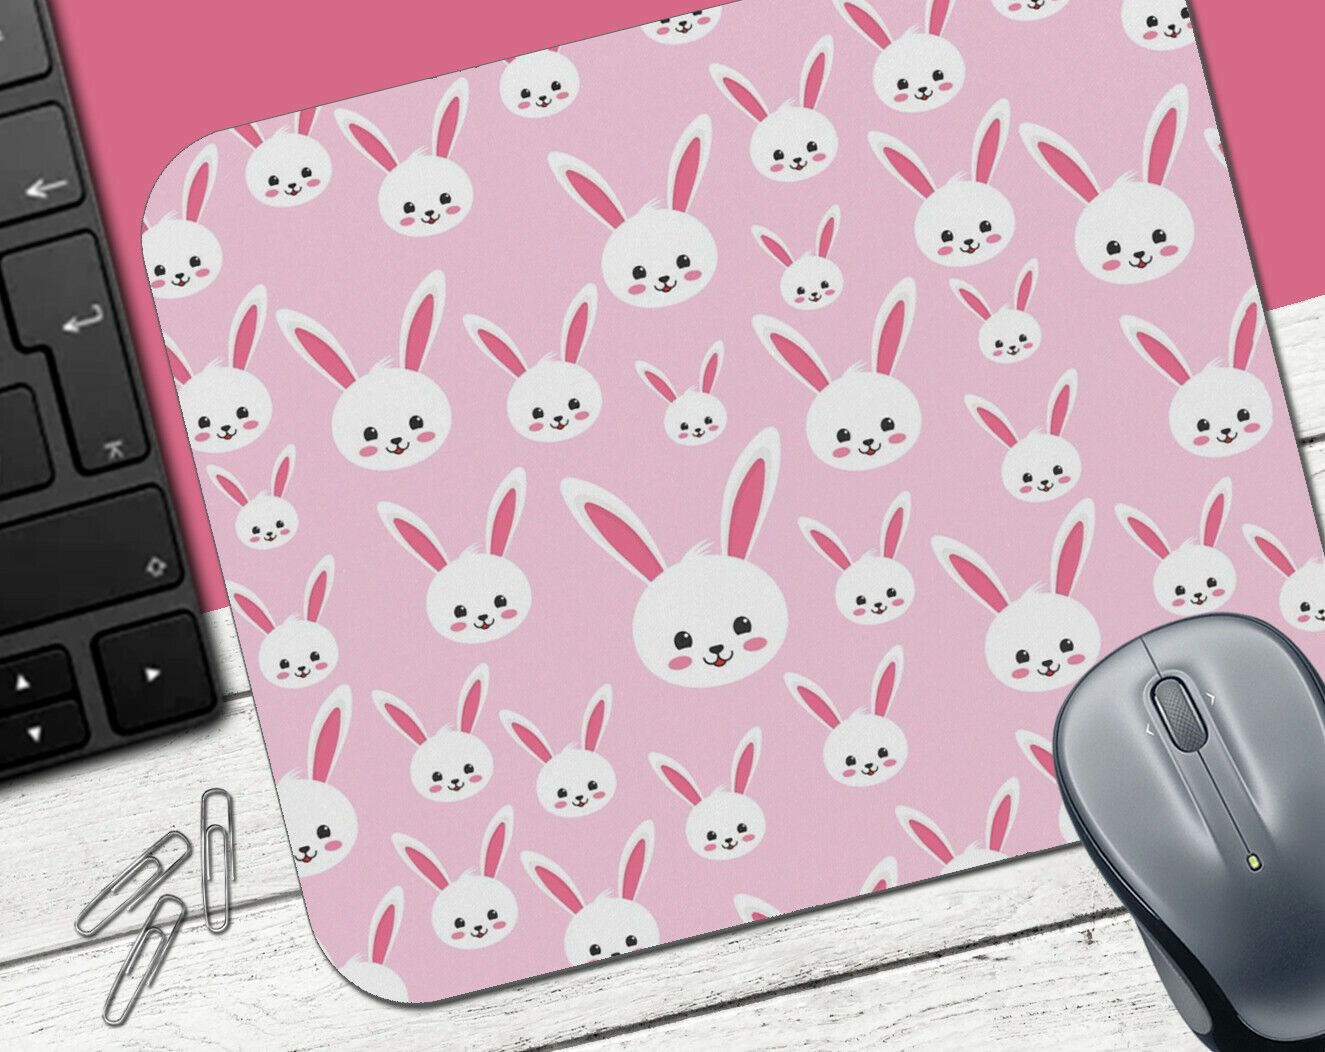 Rabbit #8 - MOUSE PAD - Animal Print Bunny Ears Easter Pink Cute Gift